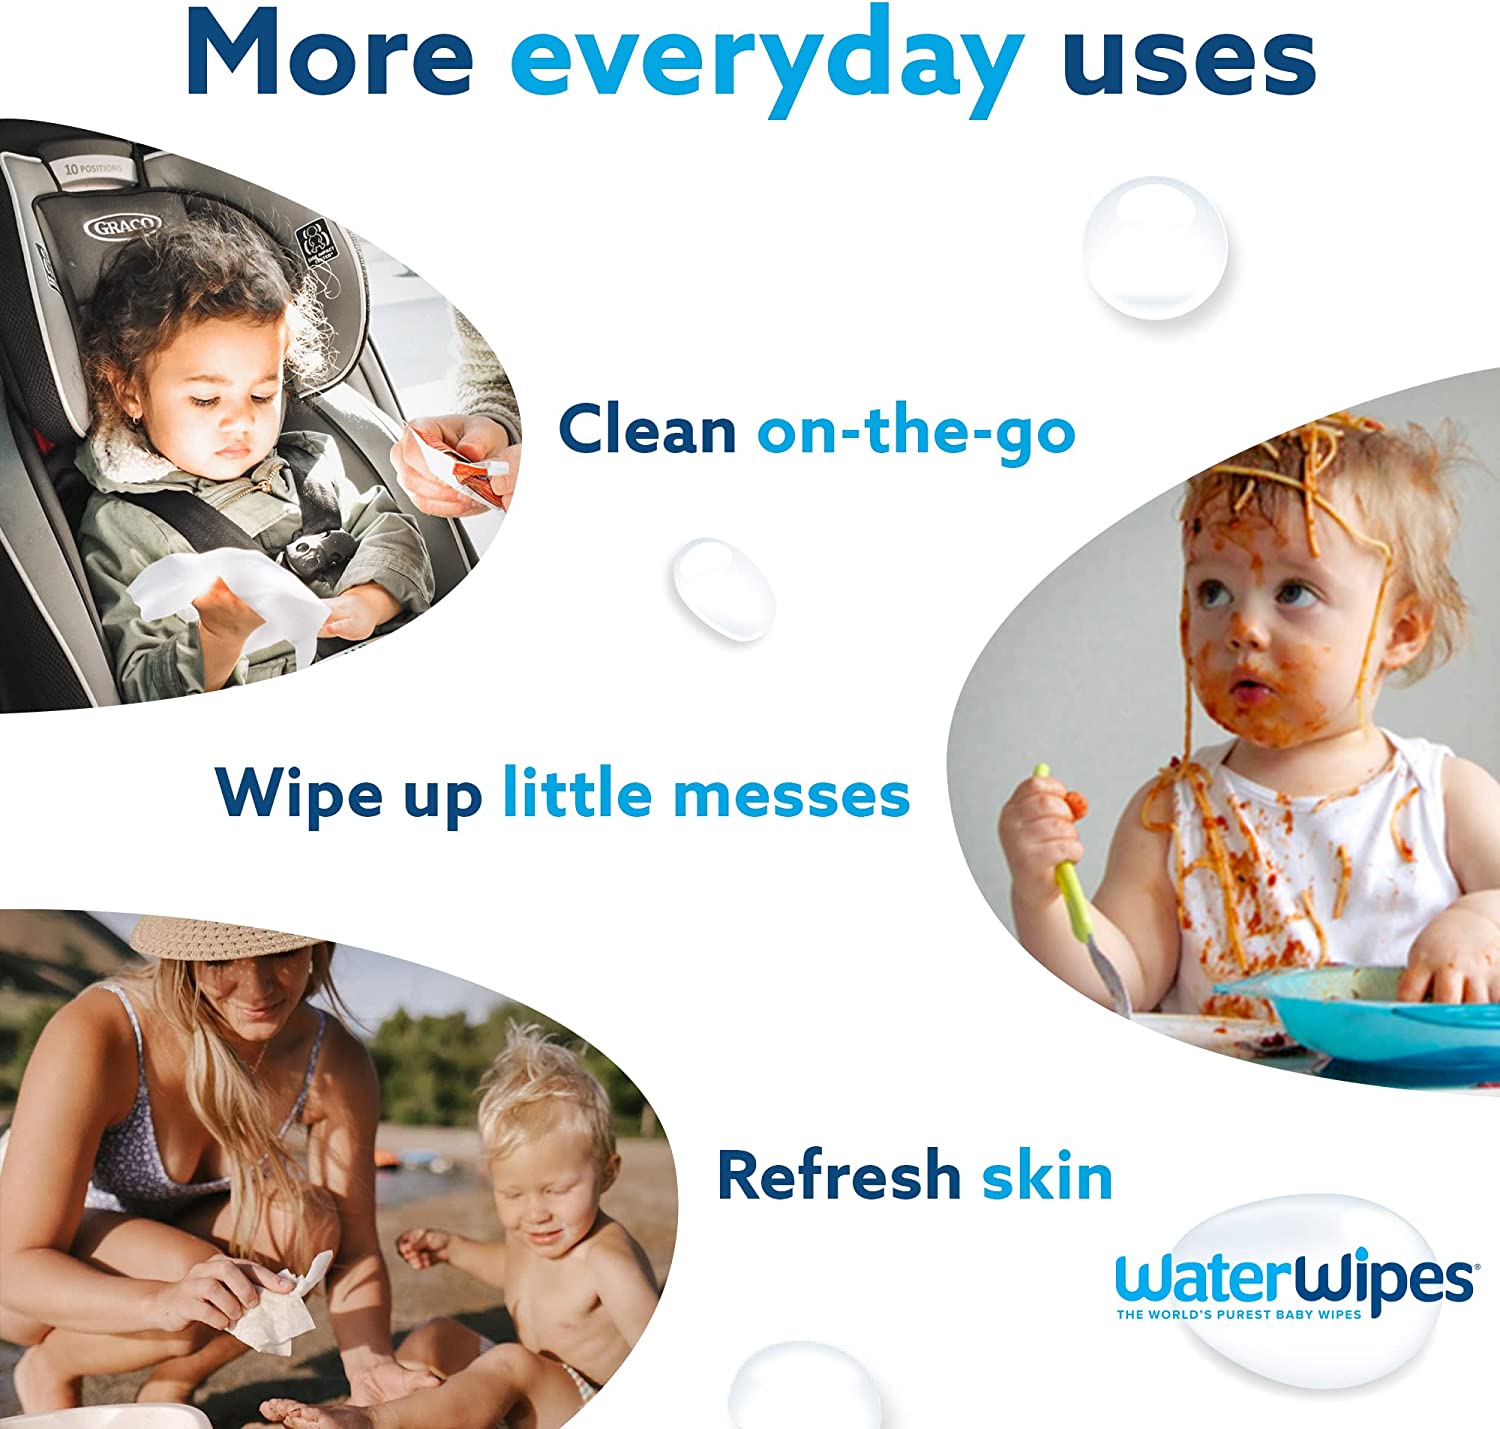 Waterwipes Biodegradable, 60 Wipes – The Moms Darling Baby Shop